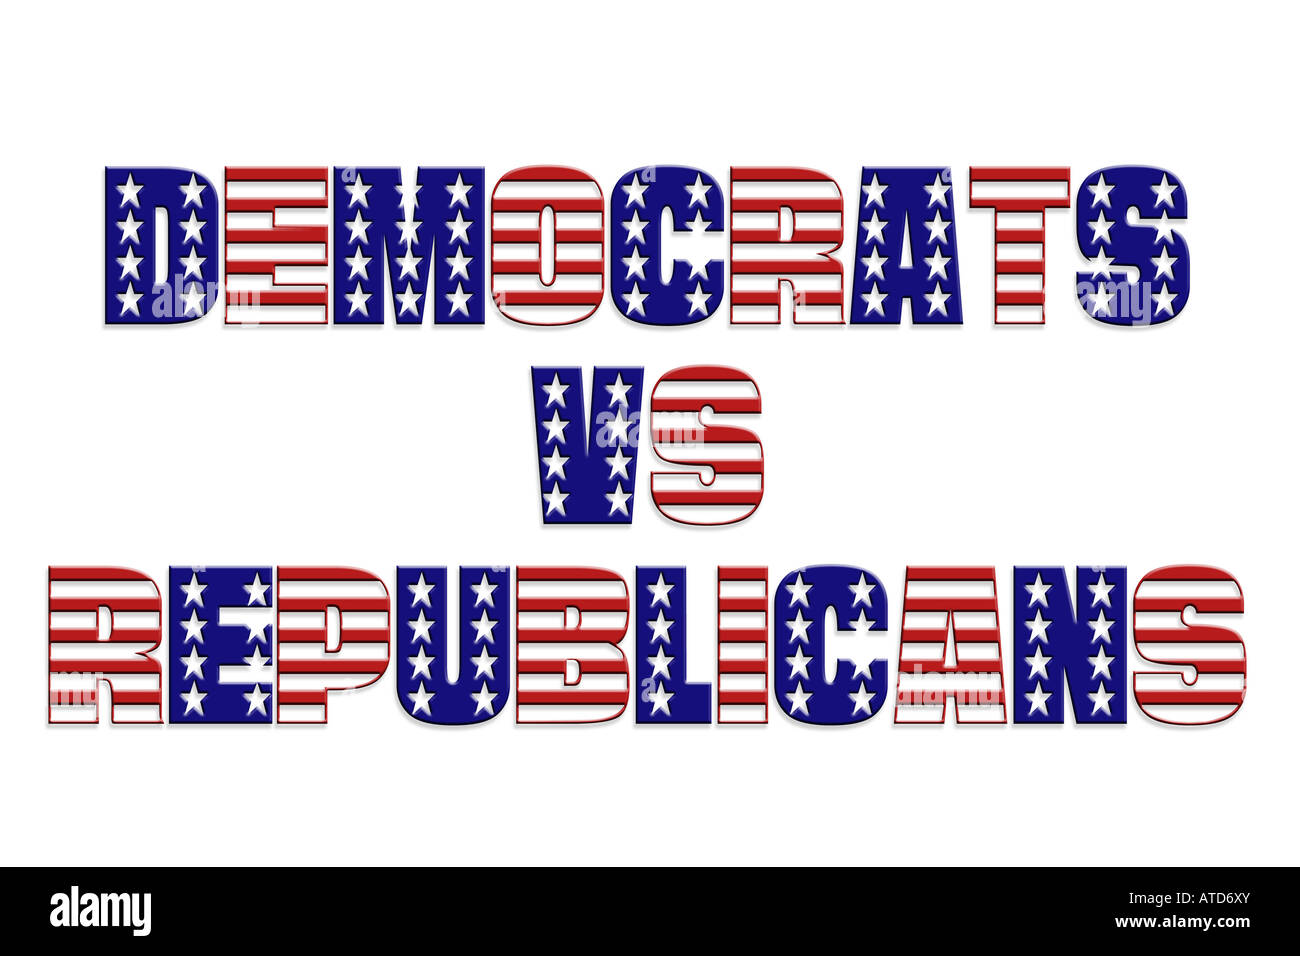 Democrats vs Republicans words with superimposed star and stripe pattern Stock Photo